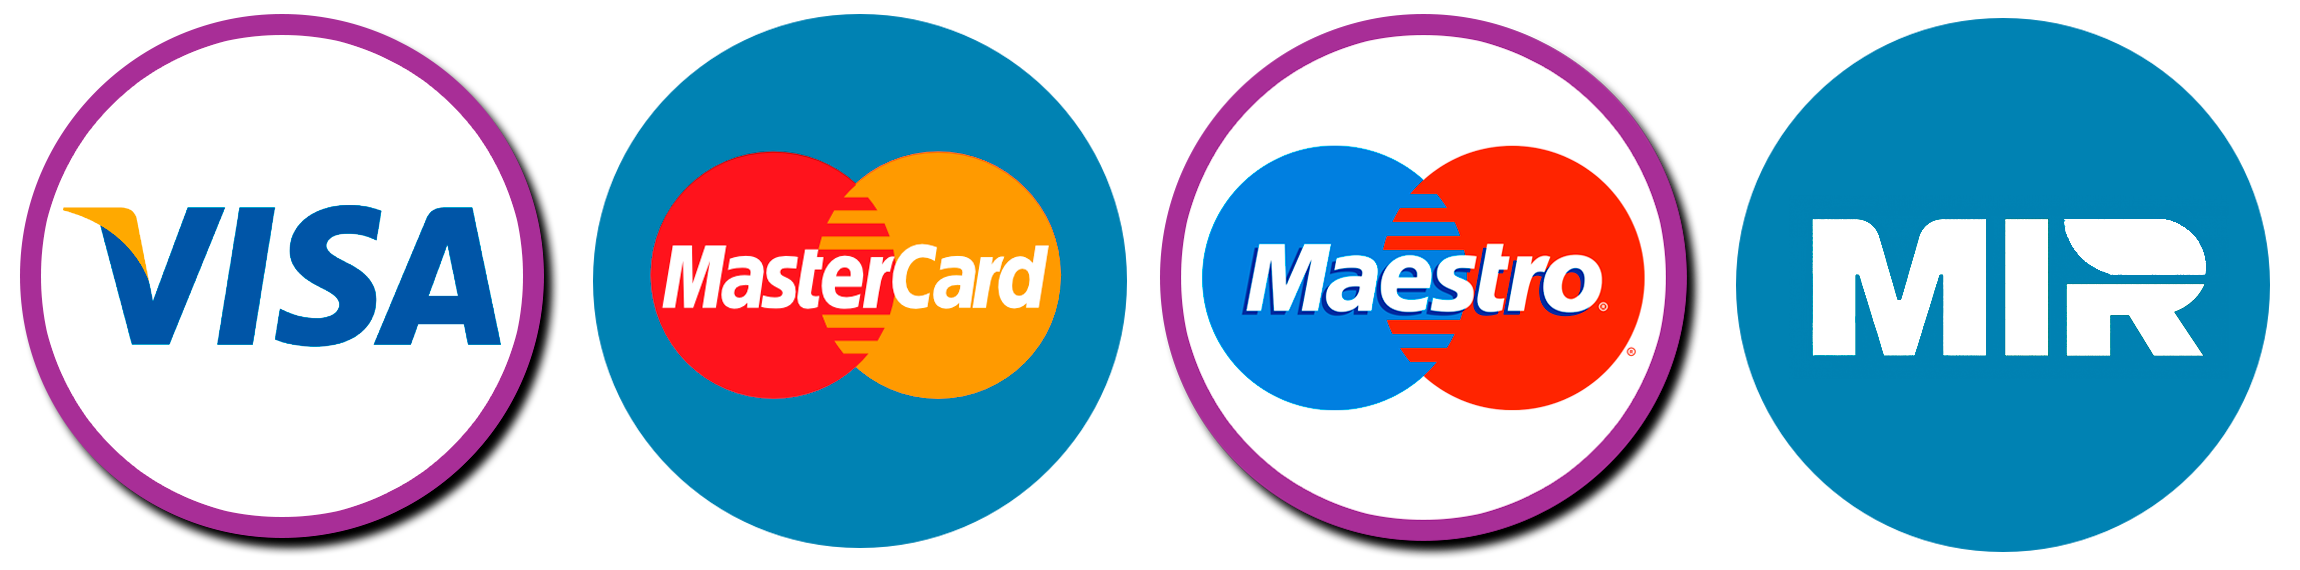 card pay systems